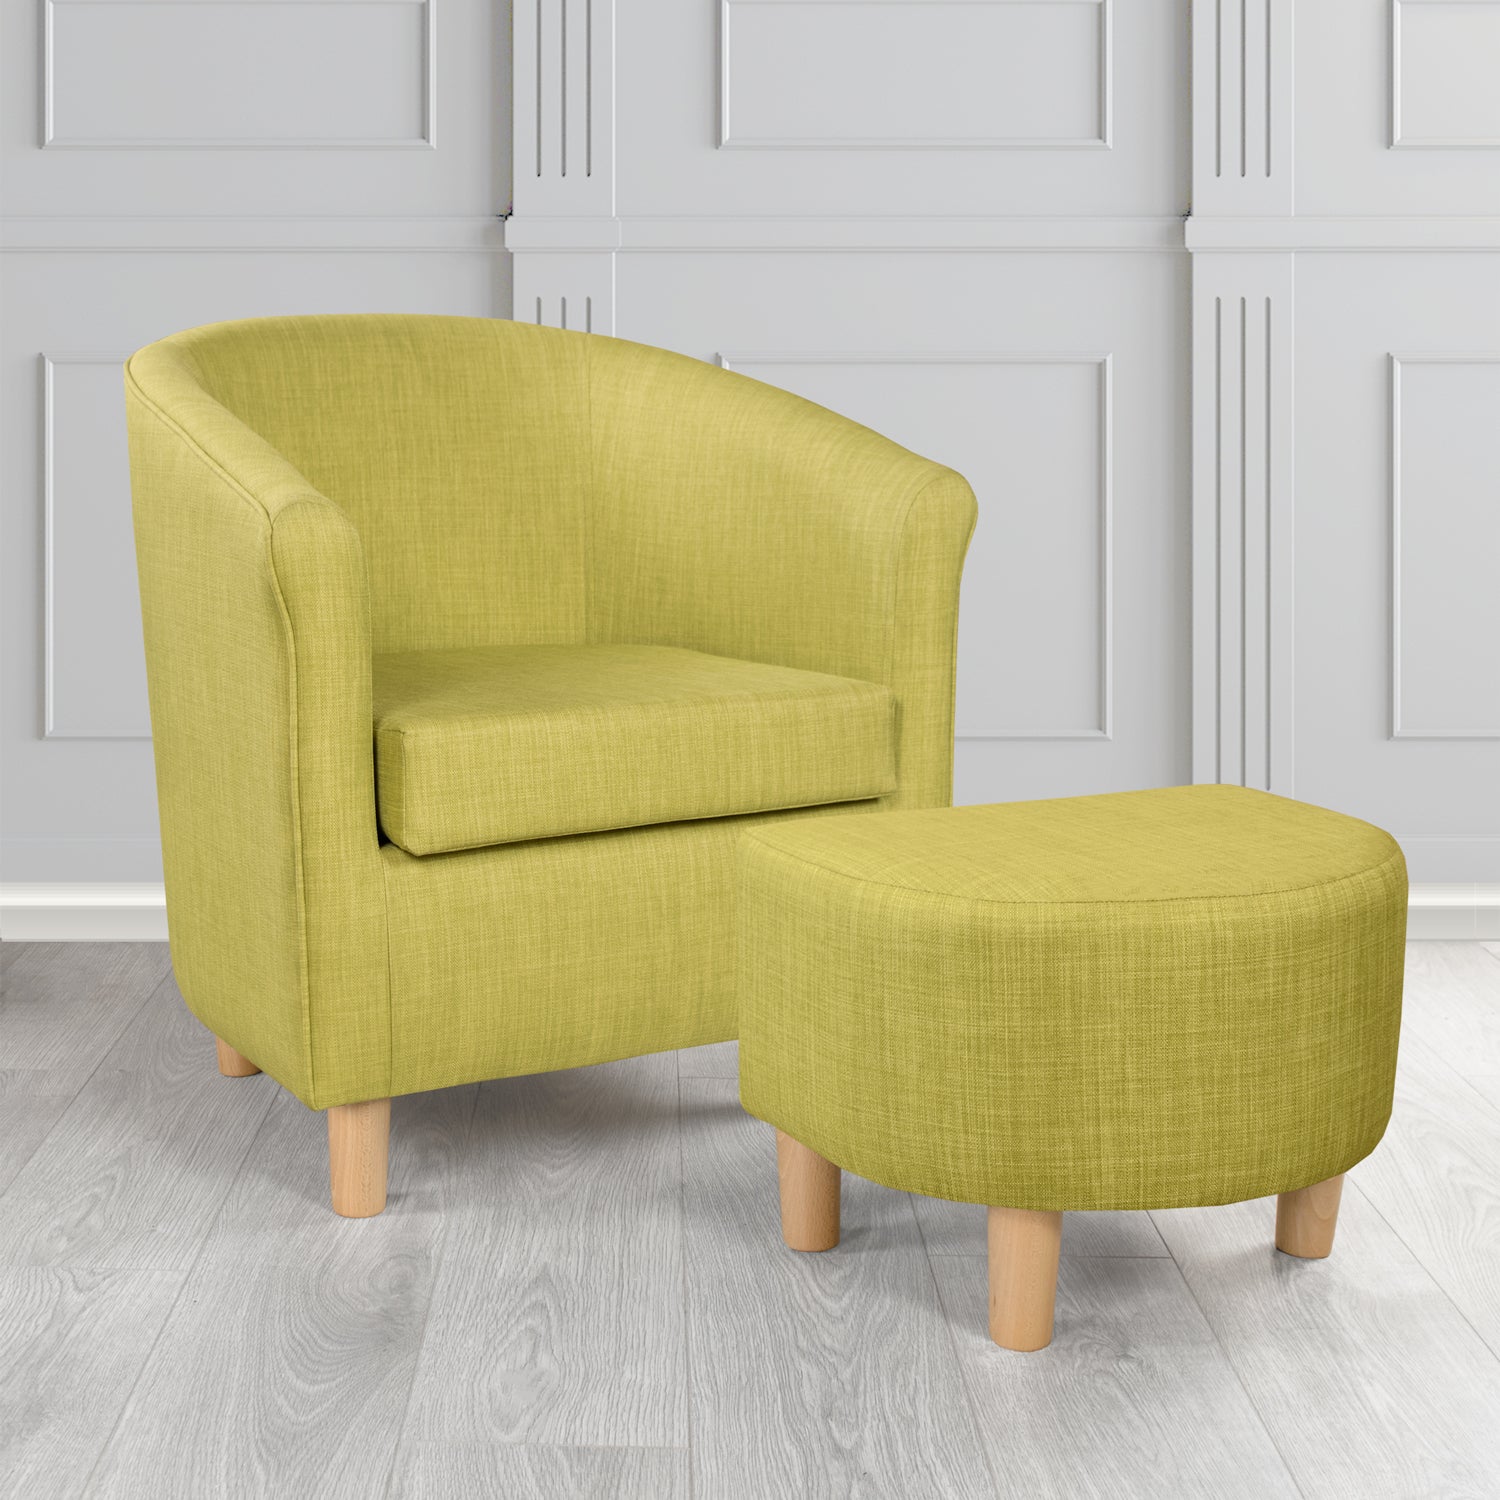 Tuscany Charles Olive Linen Plain Fabric Tub Chair with Dee Footstool Set - The Tub Chair Shop